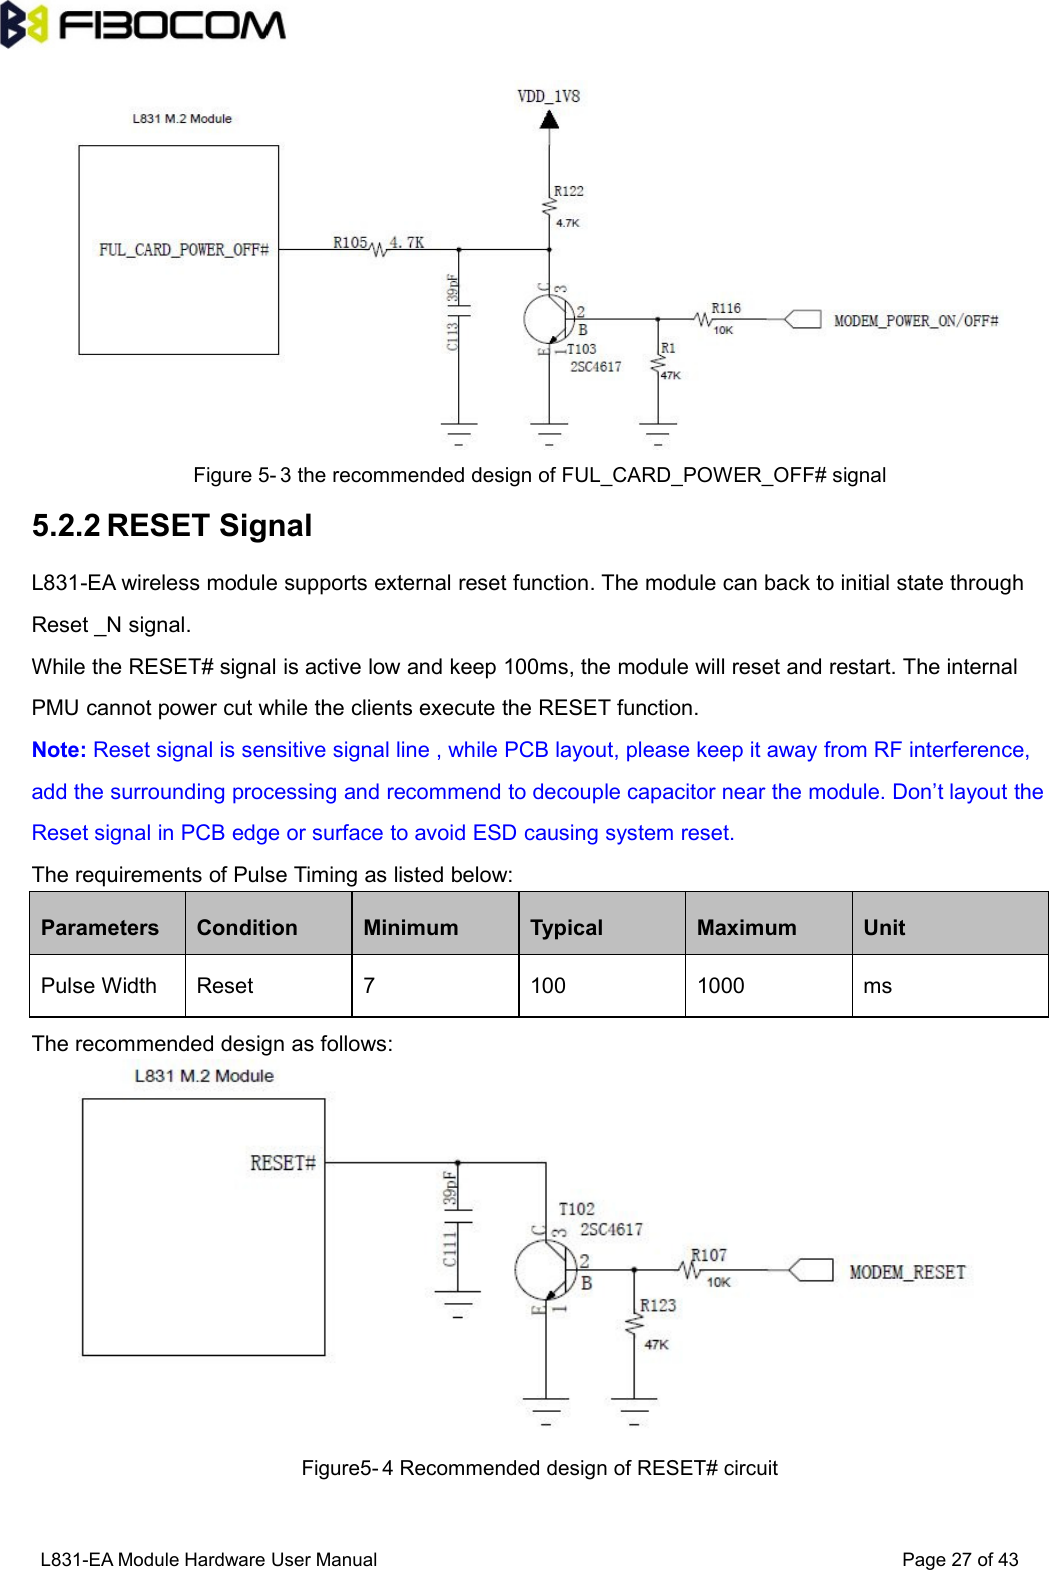 L831-EA Module Hardware User Manual Page27of43Figure 5- 3 the recommended design of FUL_CARD_POWER_OFF# signal5.2.2 RESET SignalL831-EA wireless module supports external reset function. The module can back to initial state throughReset _N signal.While the RESET# signal is active low and keep 100ms, the module will reset and restart. The internalPMU cannot power cut while the clients execute the RESET function.Note: Reset signal is sensitive signal line , while PCB layout, please keep it away from RF interference,add the surrounding processing and recommend to decouple capacitor near the module. Don’t layout theReset signal in PCB edge or surface to avoid ESD causing system reset.The requirements of Pulse Timing as listed below:ParametersConditionMinimumTypicalMaximumUnitPulse WidthReset71001000msThe recommended design as follows:Figure5- 4 Recommended design of RESET# circuit